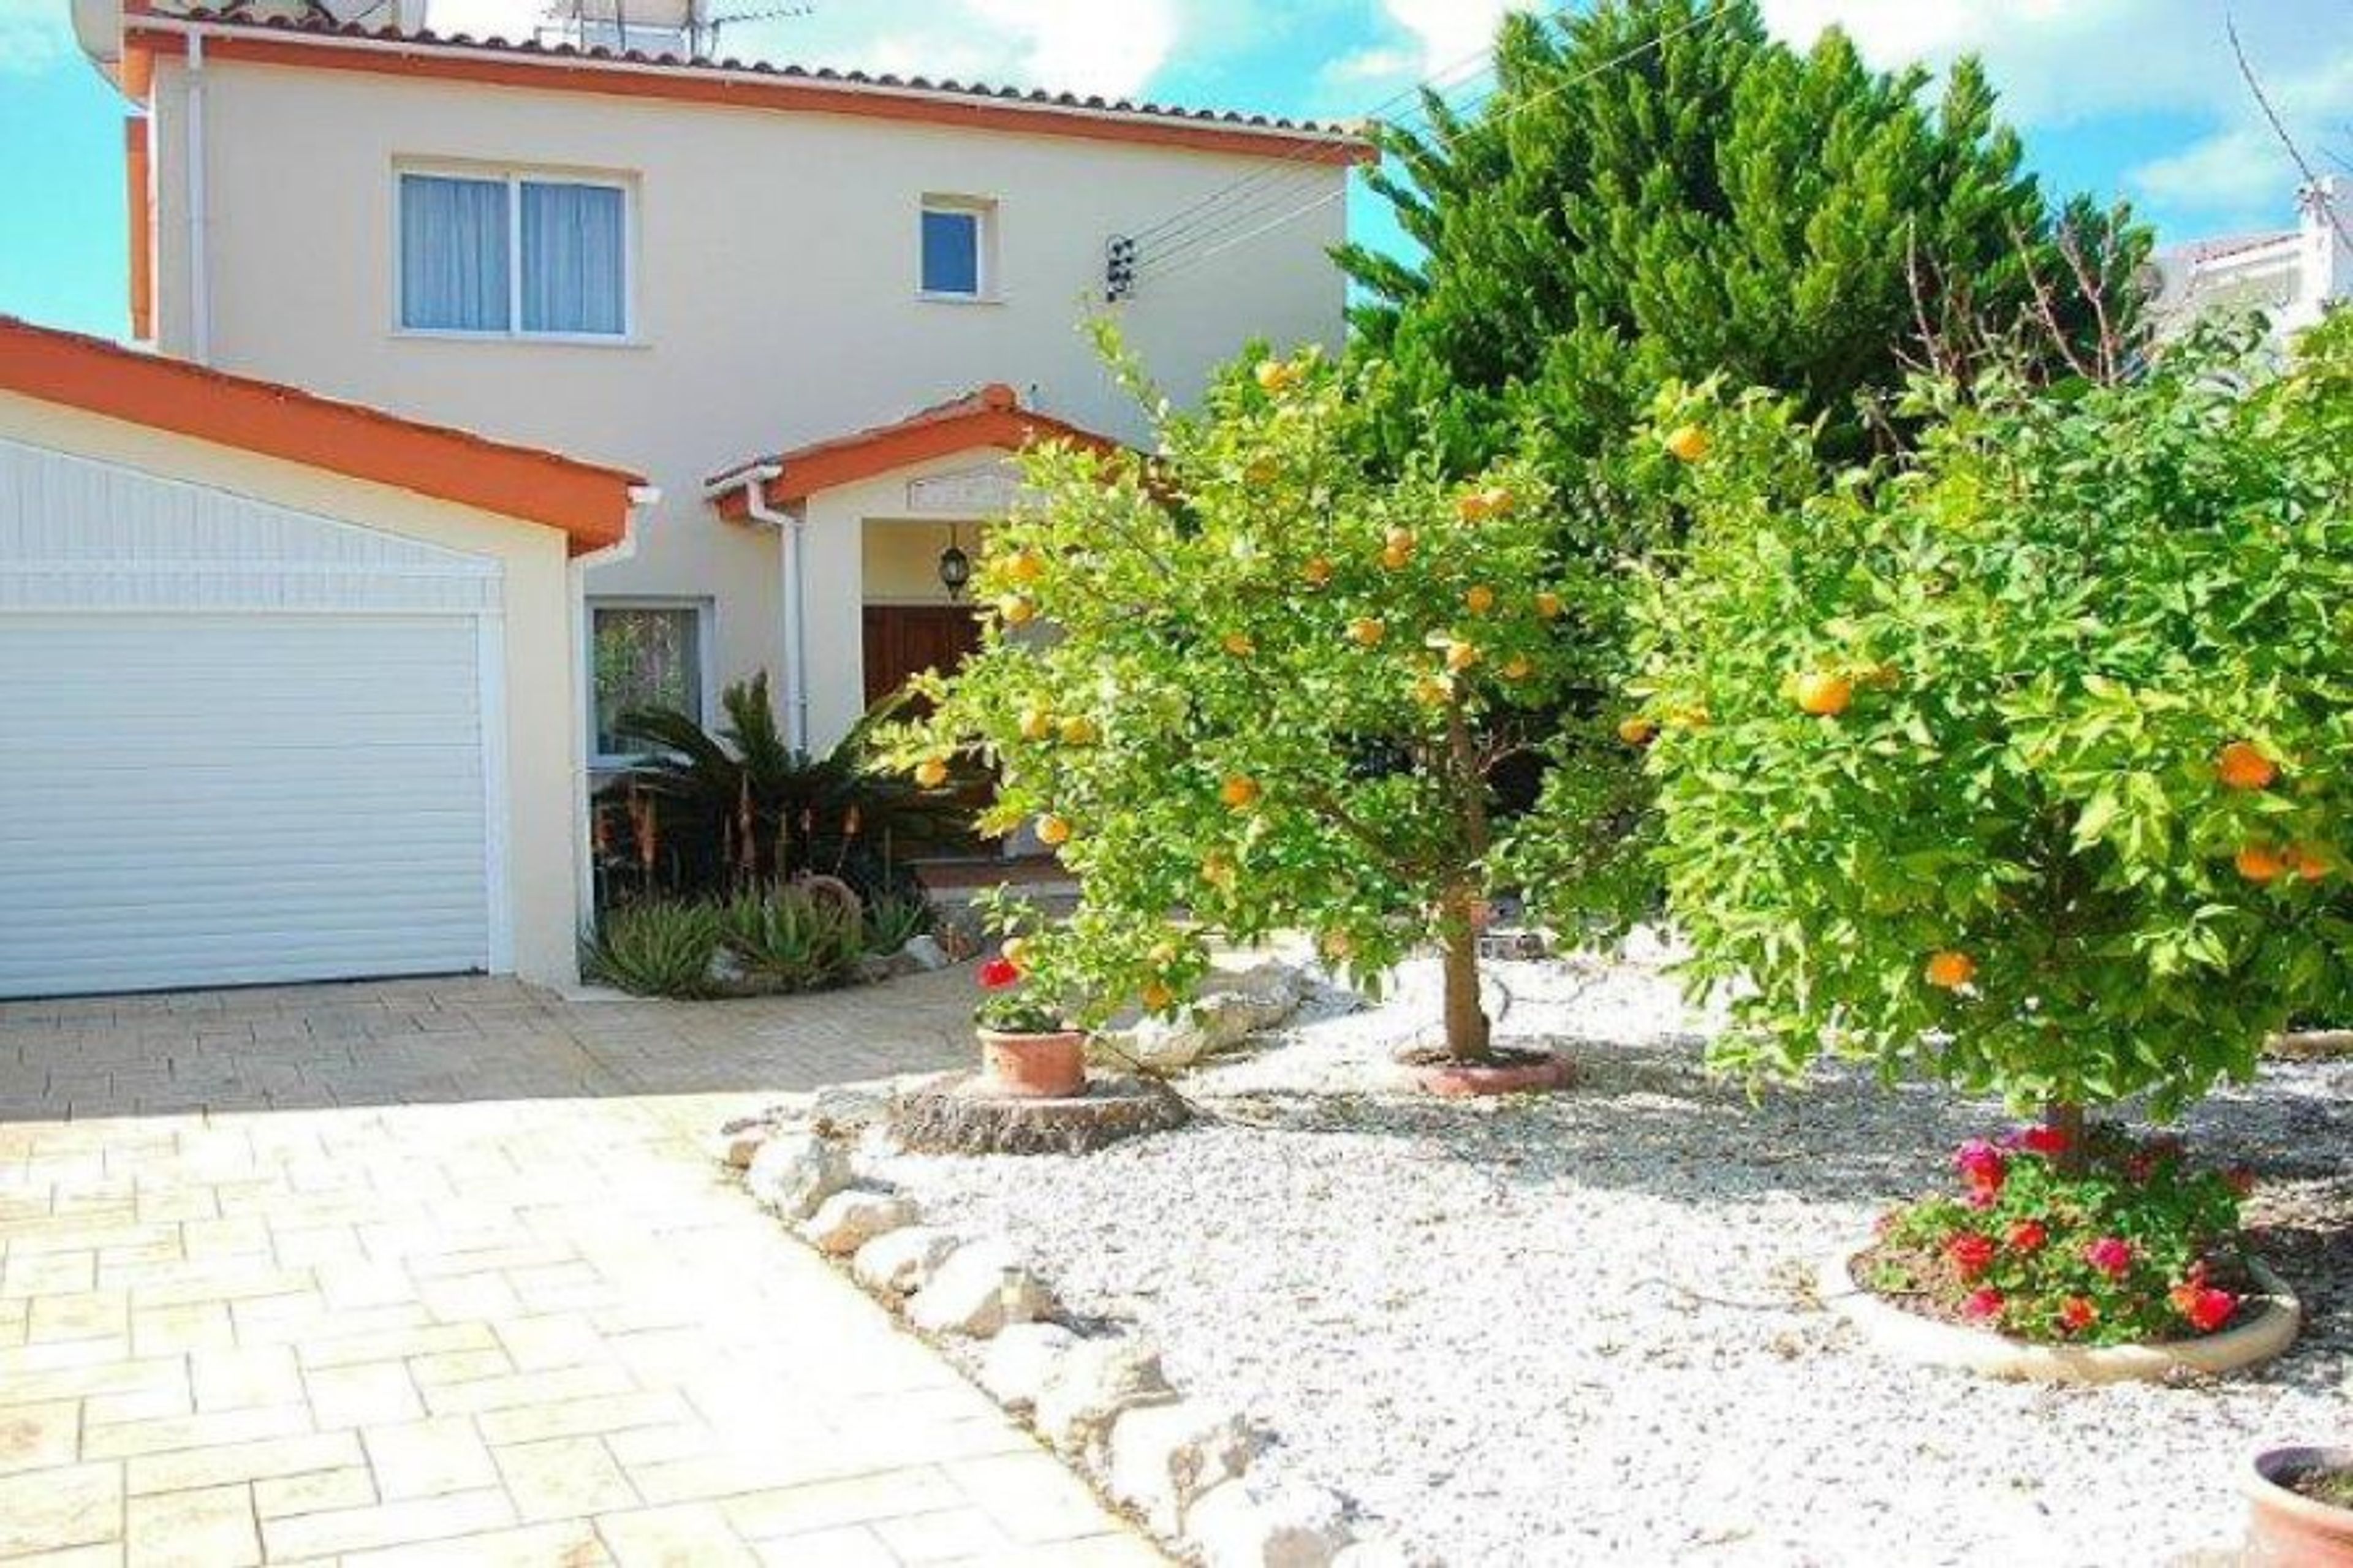 Welcome to the detached holiday villa Hieros Kepos in Paphos